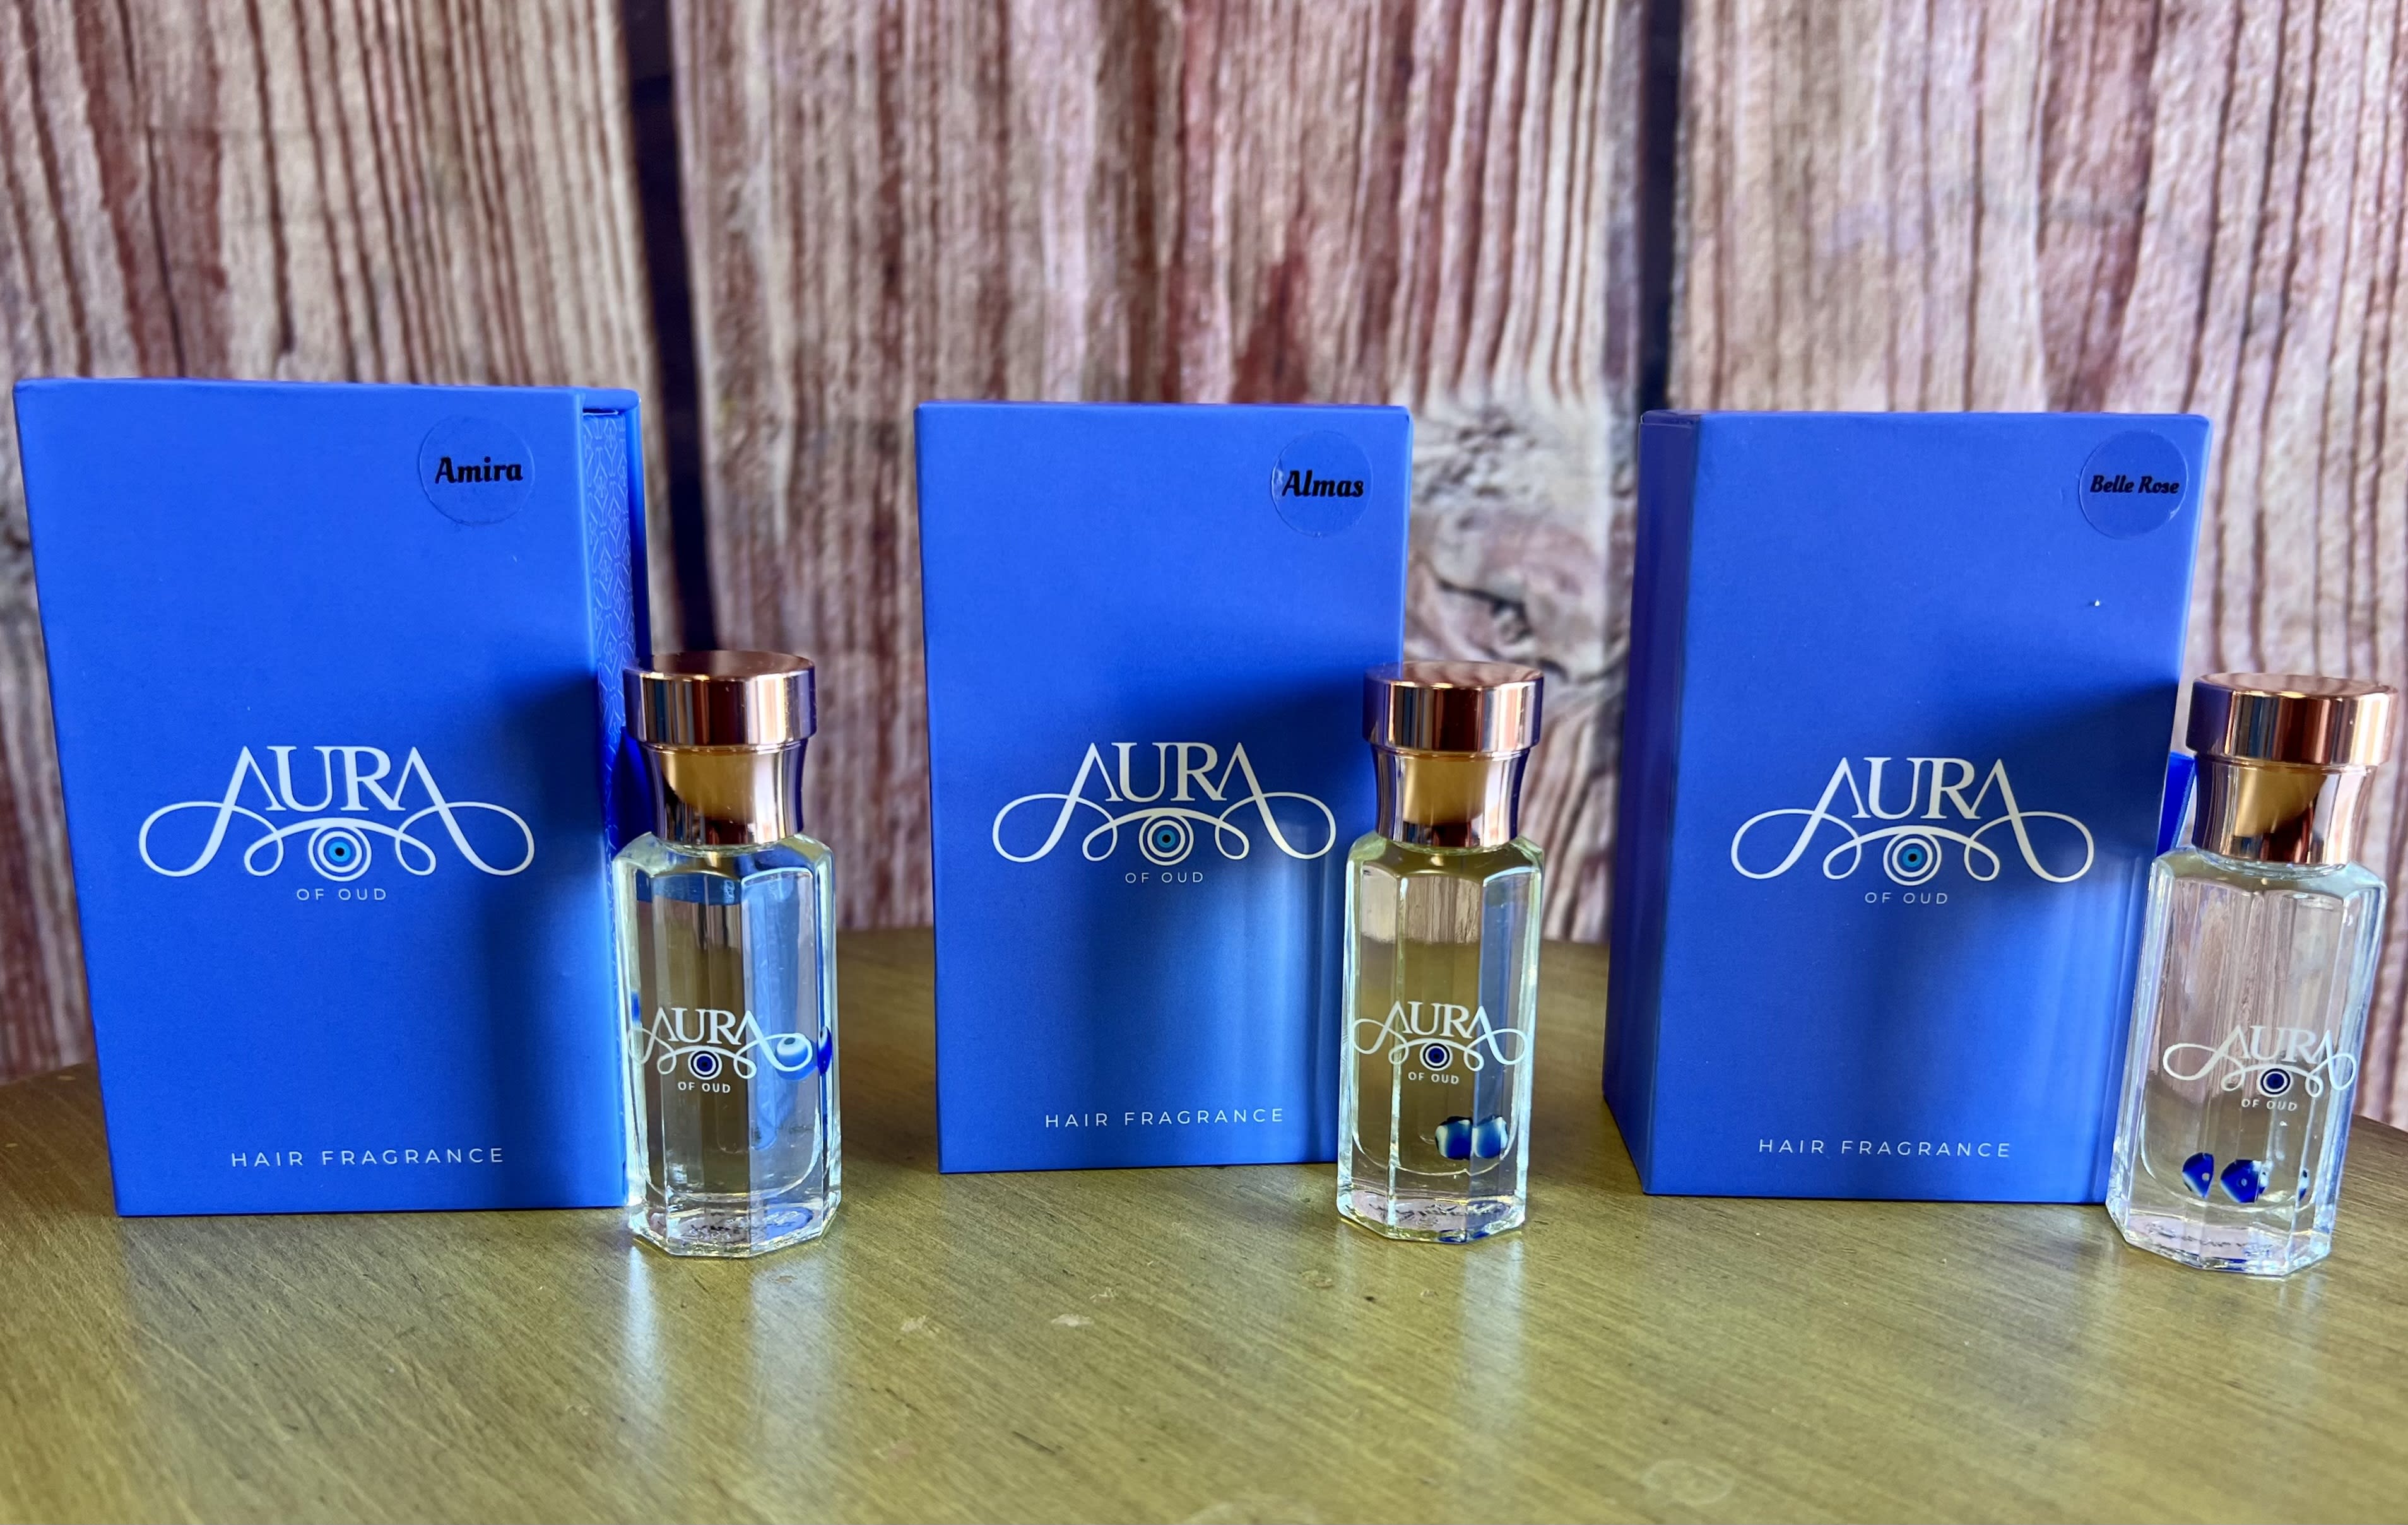 Aura of Oud - Aura of Oud! Alcohol Free, Long Lasting Hair Fragrance. If you like to smell amazing, if you want people to ask you what you're wearing, if you want a fragrance that literally makes you feel absolutely gorgeous.... you need this! Oud infused scent, no harmful chemicals, long lasting scent, alcohol free, no water added, and can be used on skin! Aura of Oud hair fragrance is available here in store in 3 amazing fragrances- Almas, Belle Rose, and Amira!